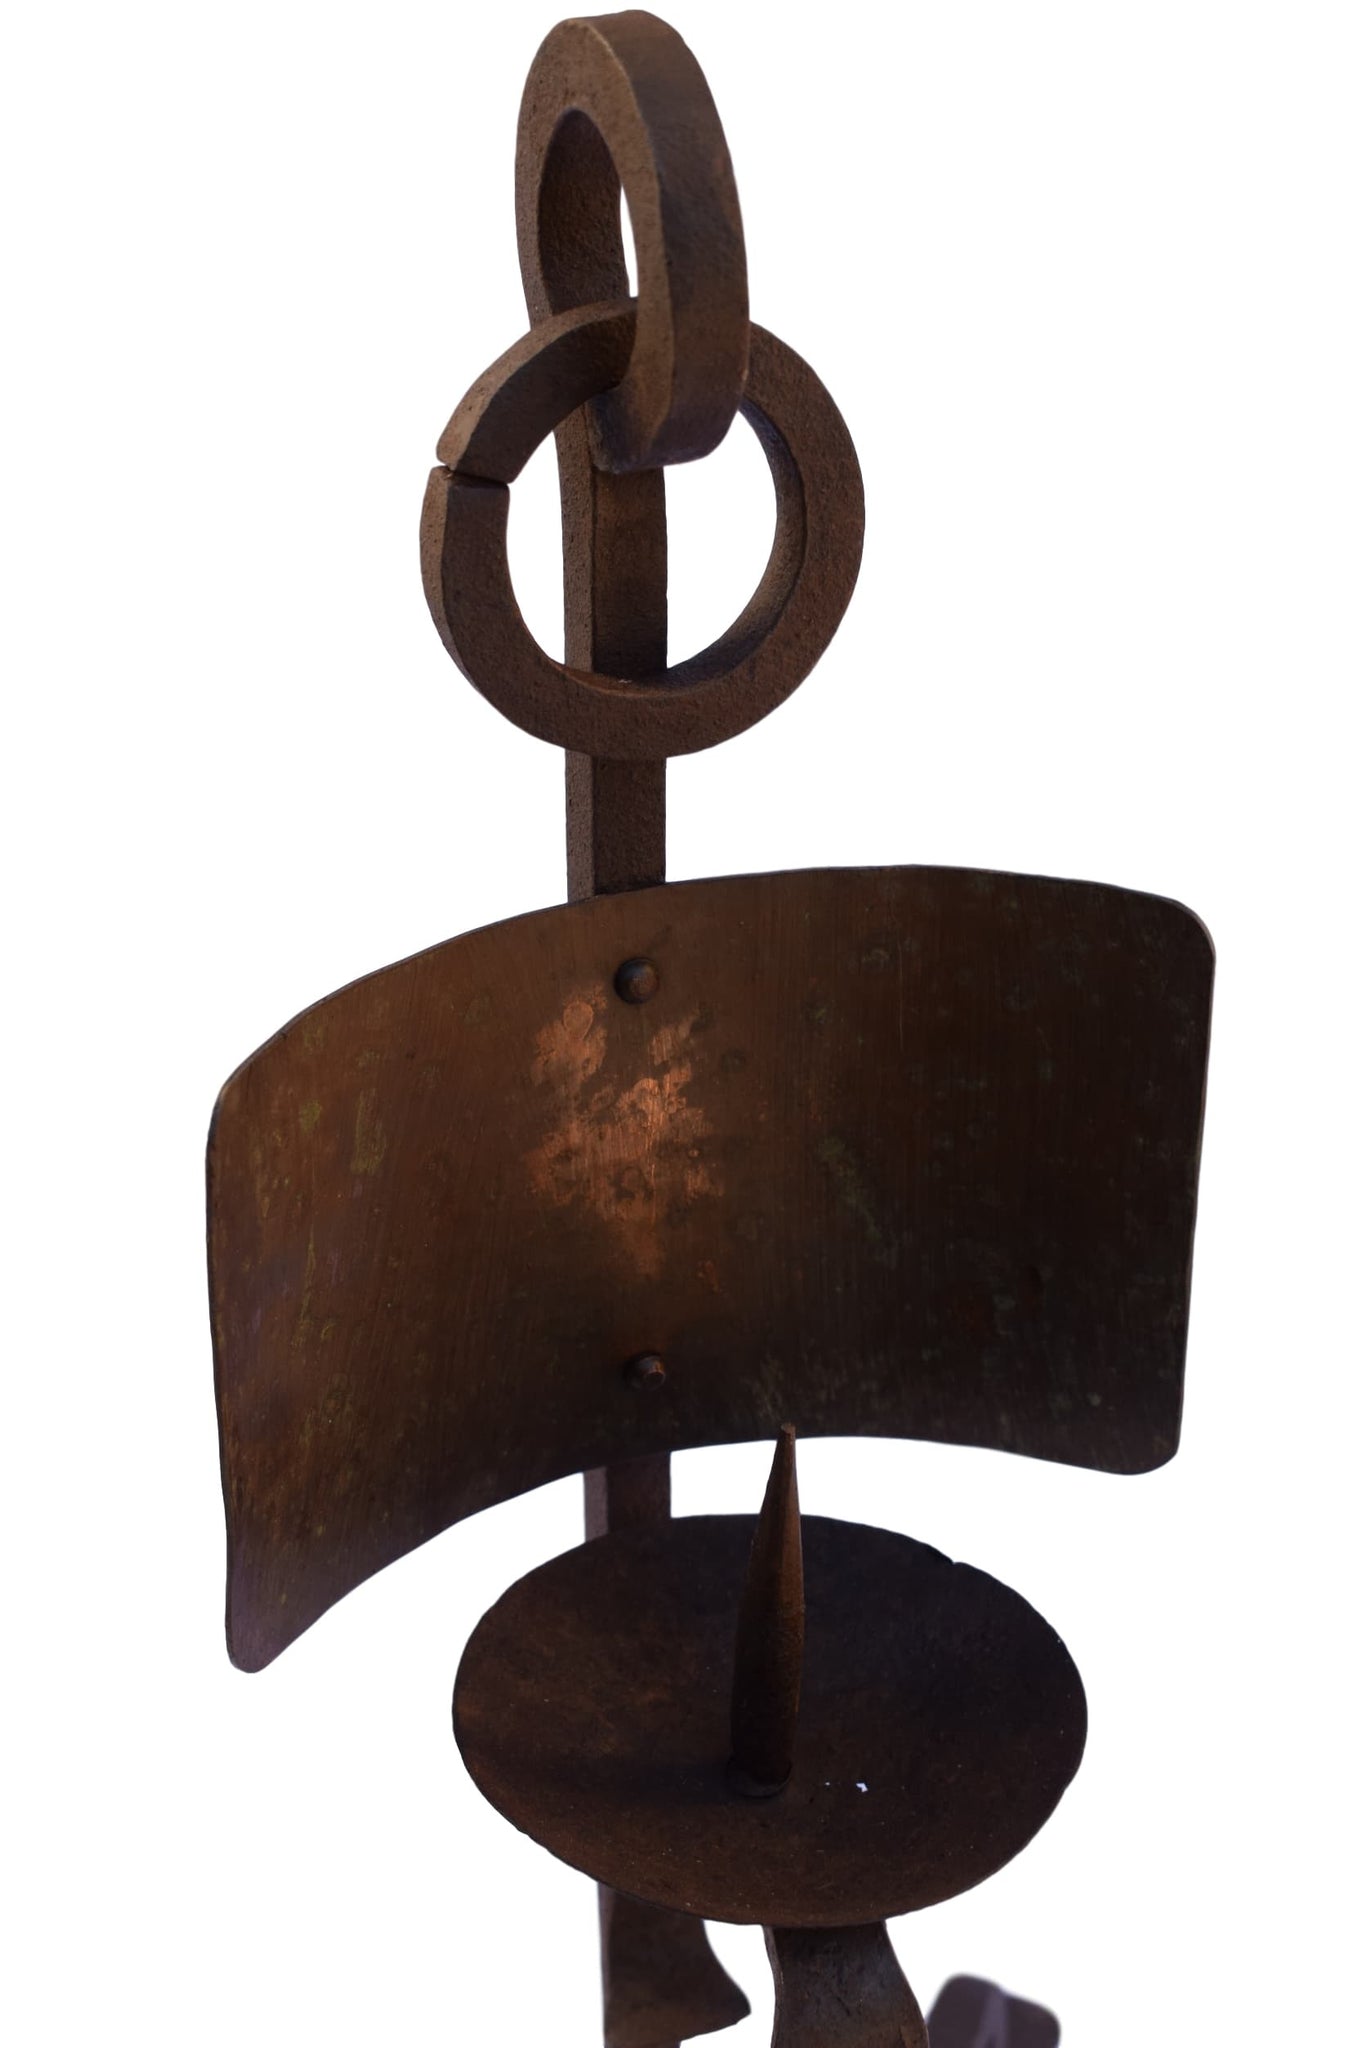 Wrought Iron Candle Stick Holder - Charmantiques